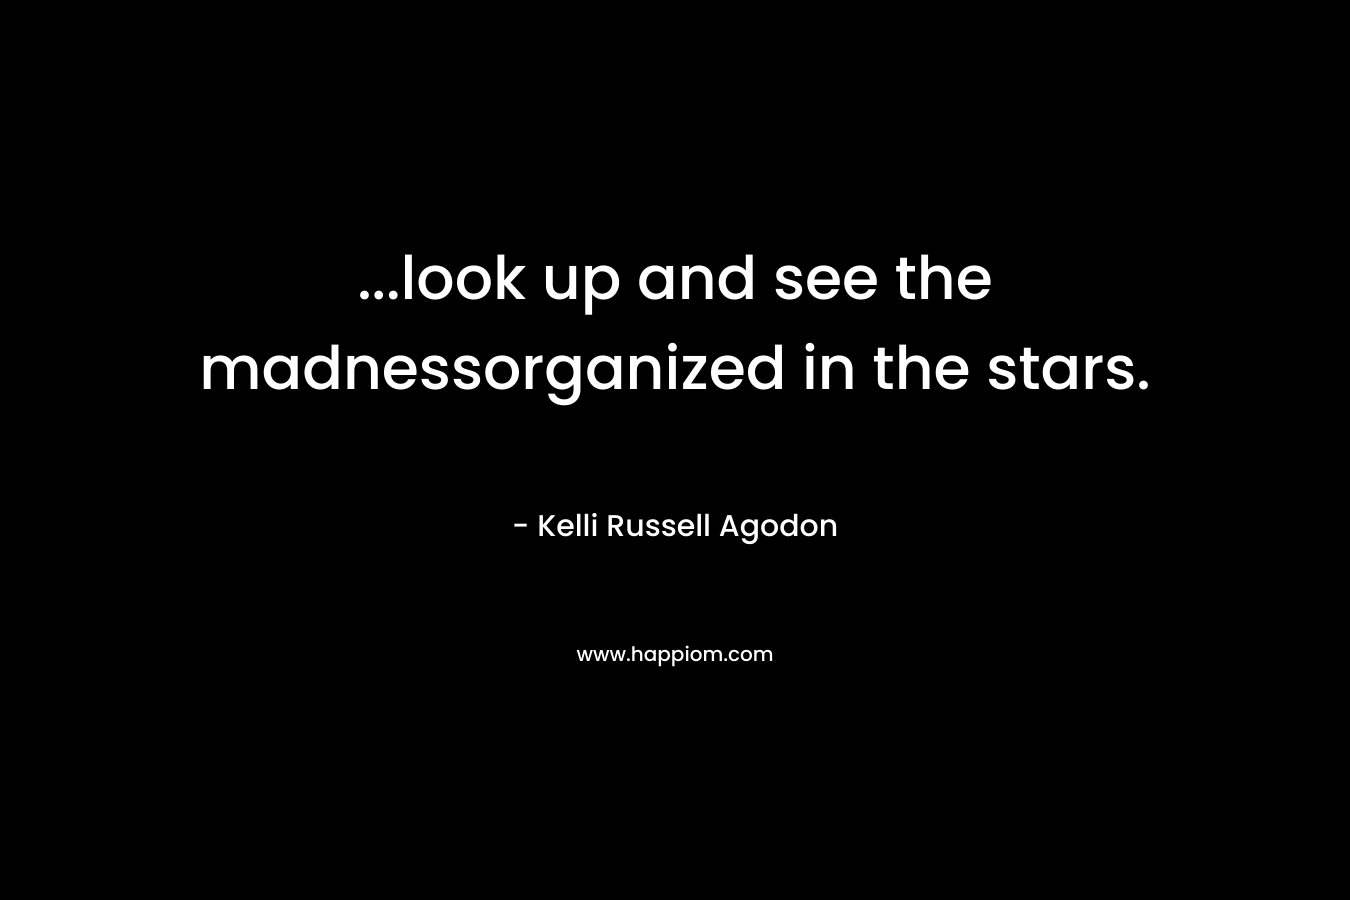 ...look up and see the madnessorganized in the stars.